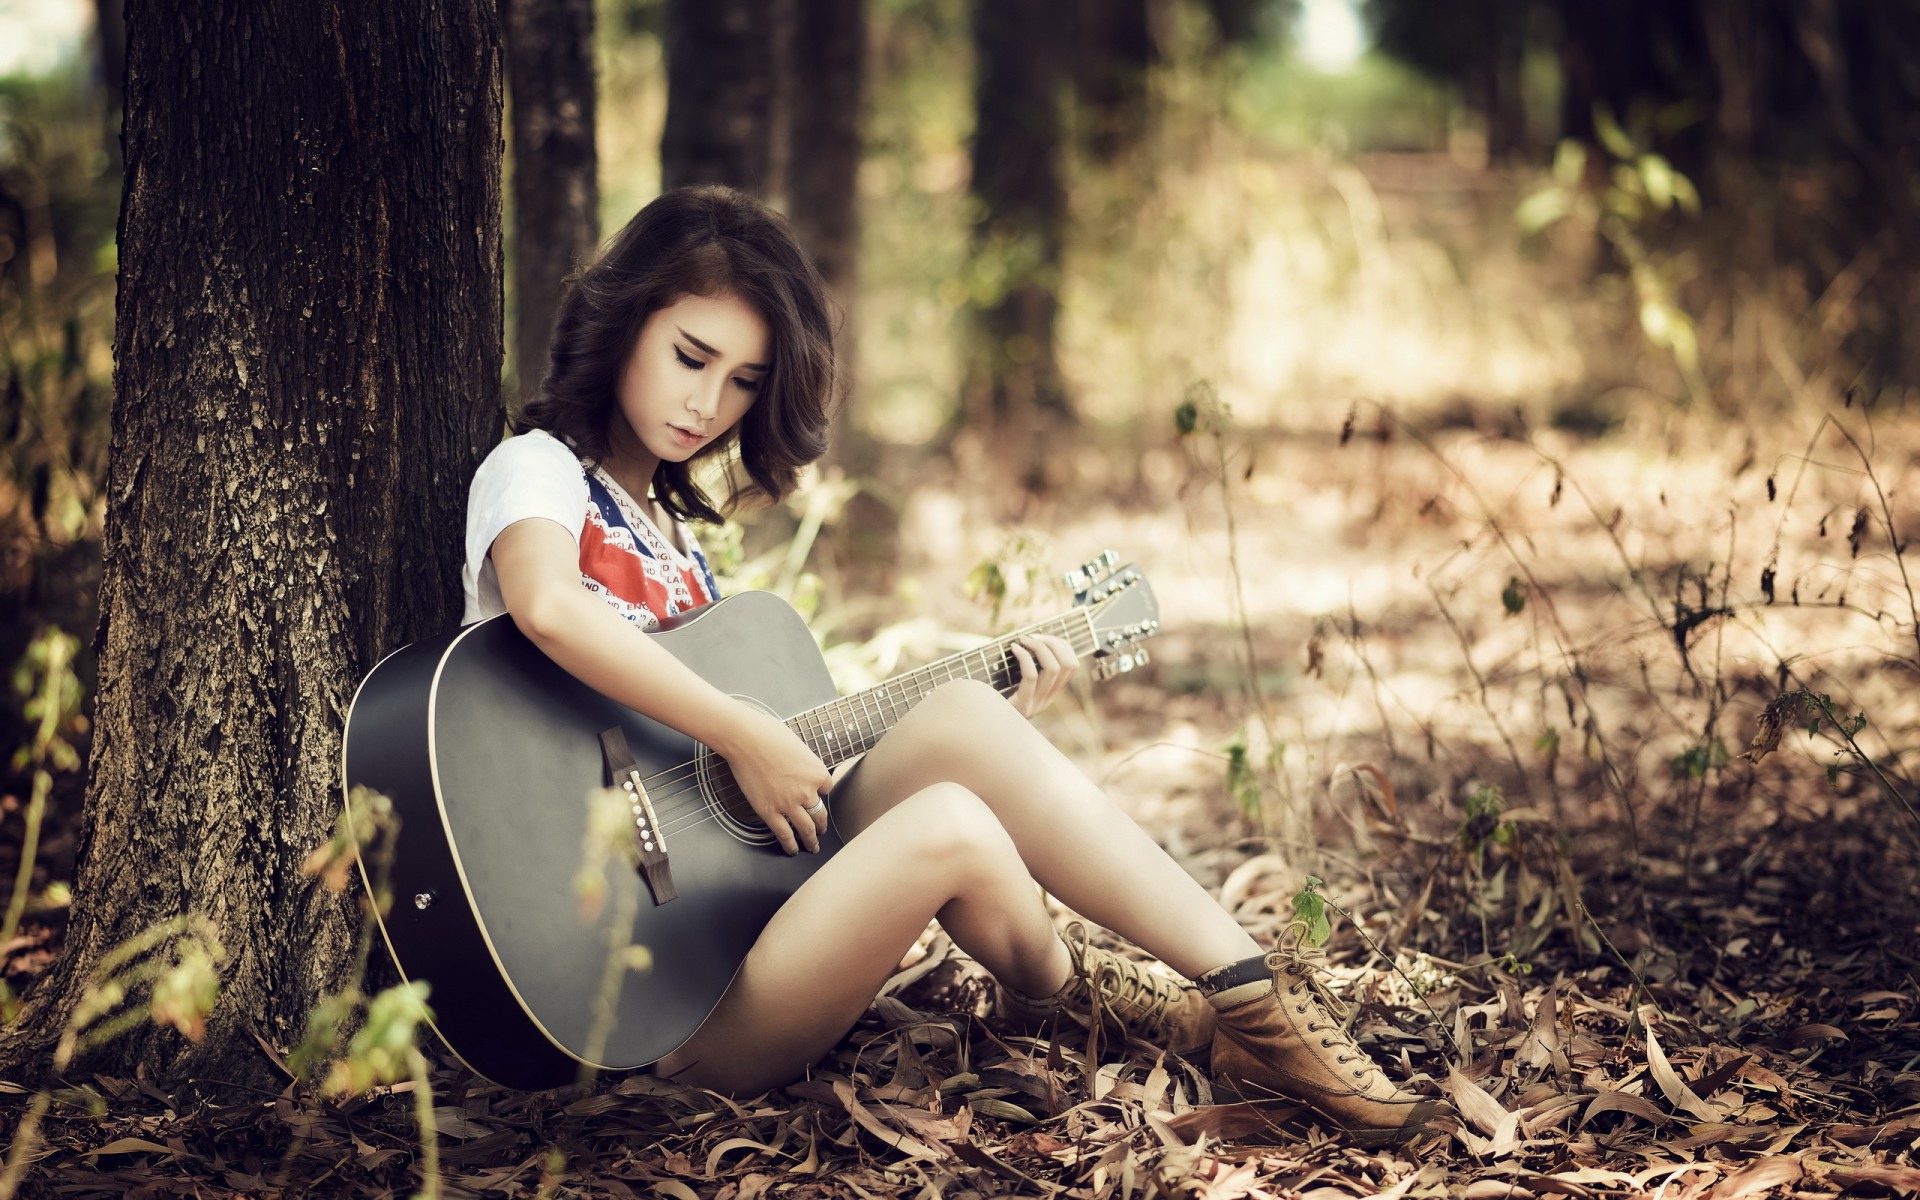 Wallpapers girl forest guitar on the desktop